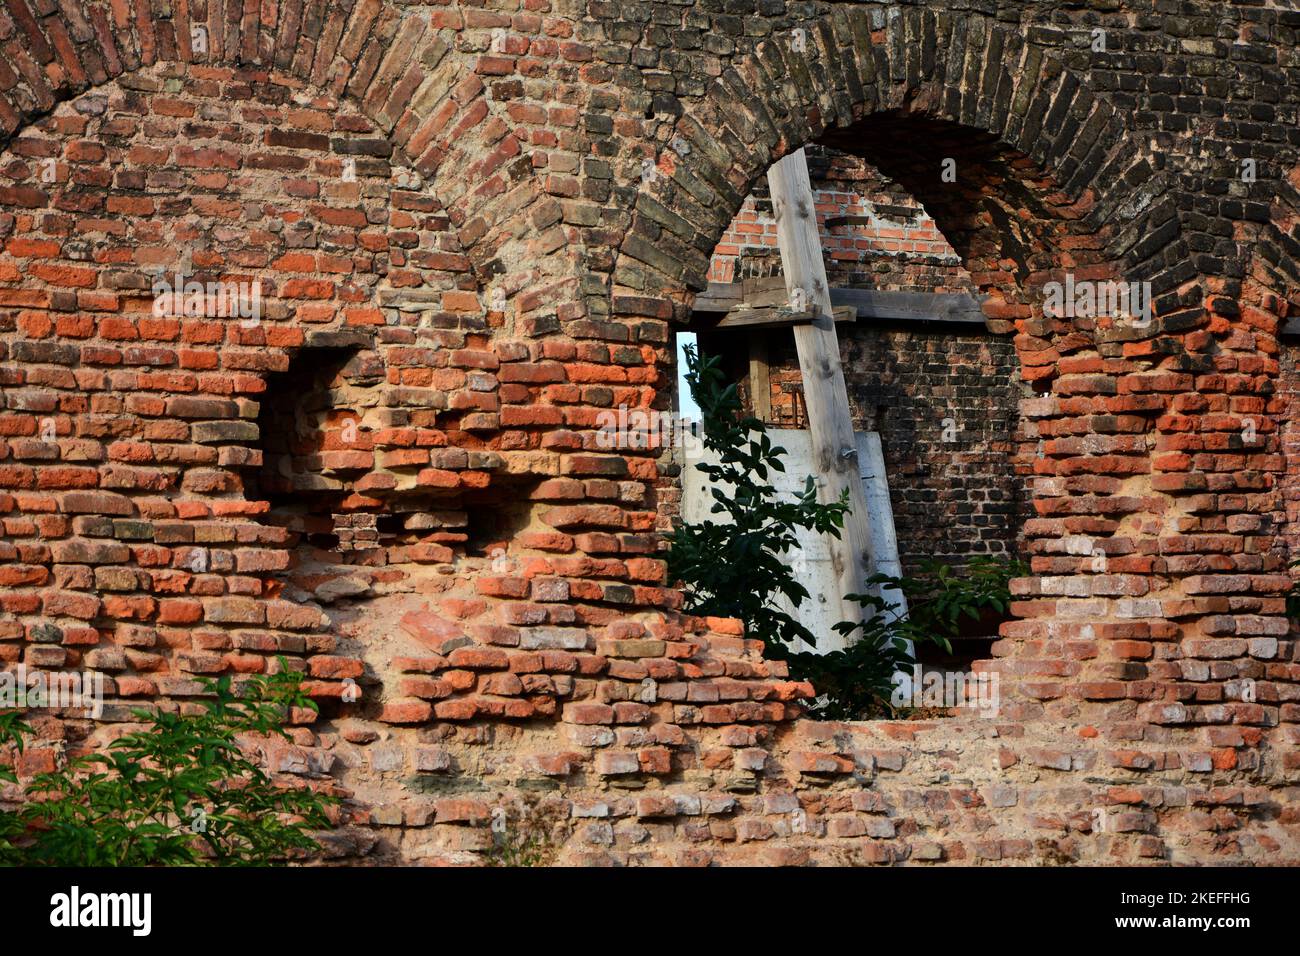 brick wall with window arch, brick house ruins, picture in picture, ruined brick wall with windows Stock Photo